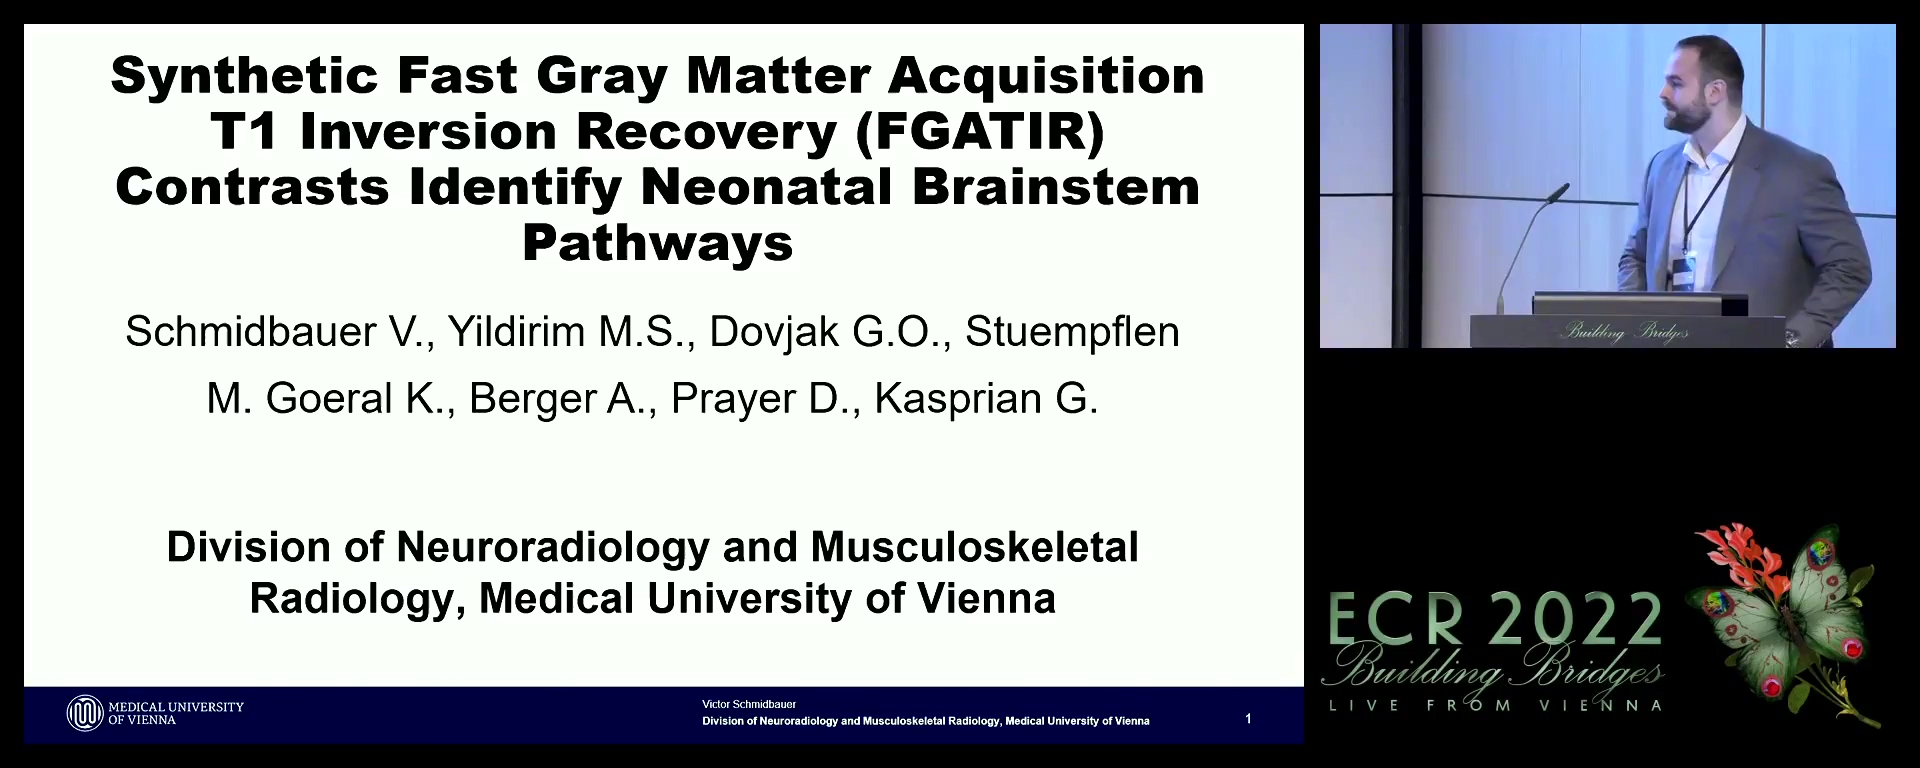 Synthetic MRI-based fast gray matter acquisition T1 inversion recovery (FGATIR) contrasts identify neonatal brainstem pathways in vivo - Victor Schmidbauer, Vienna / AT